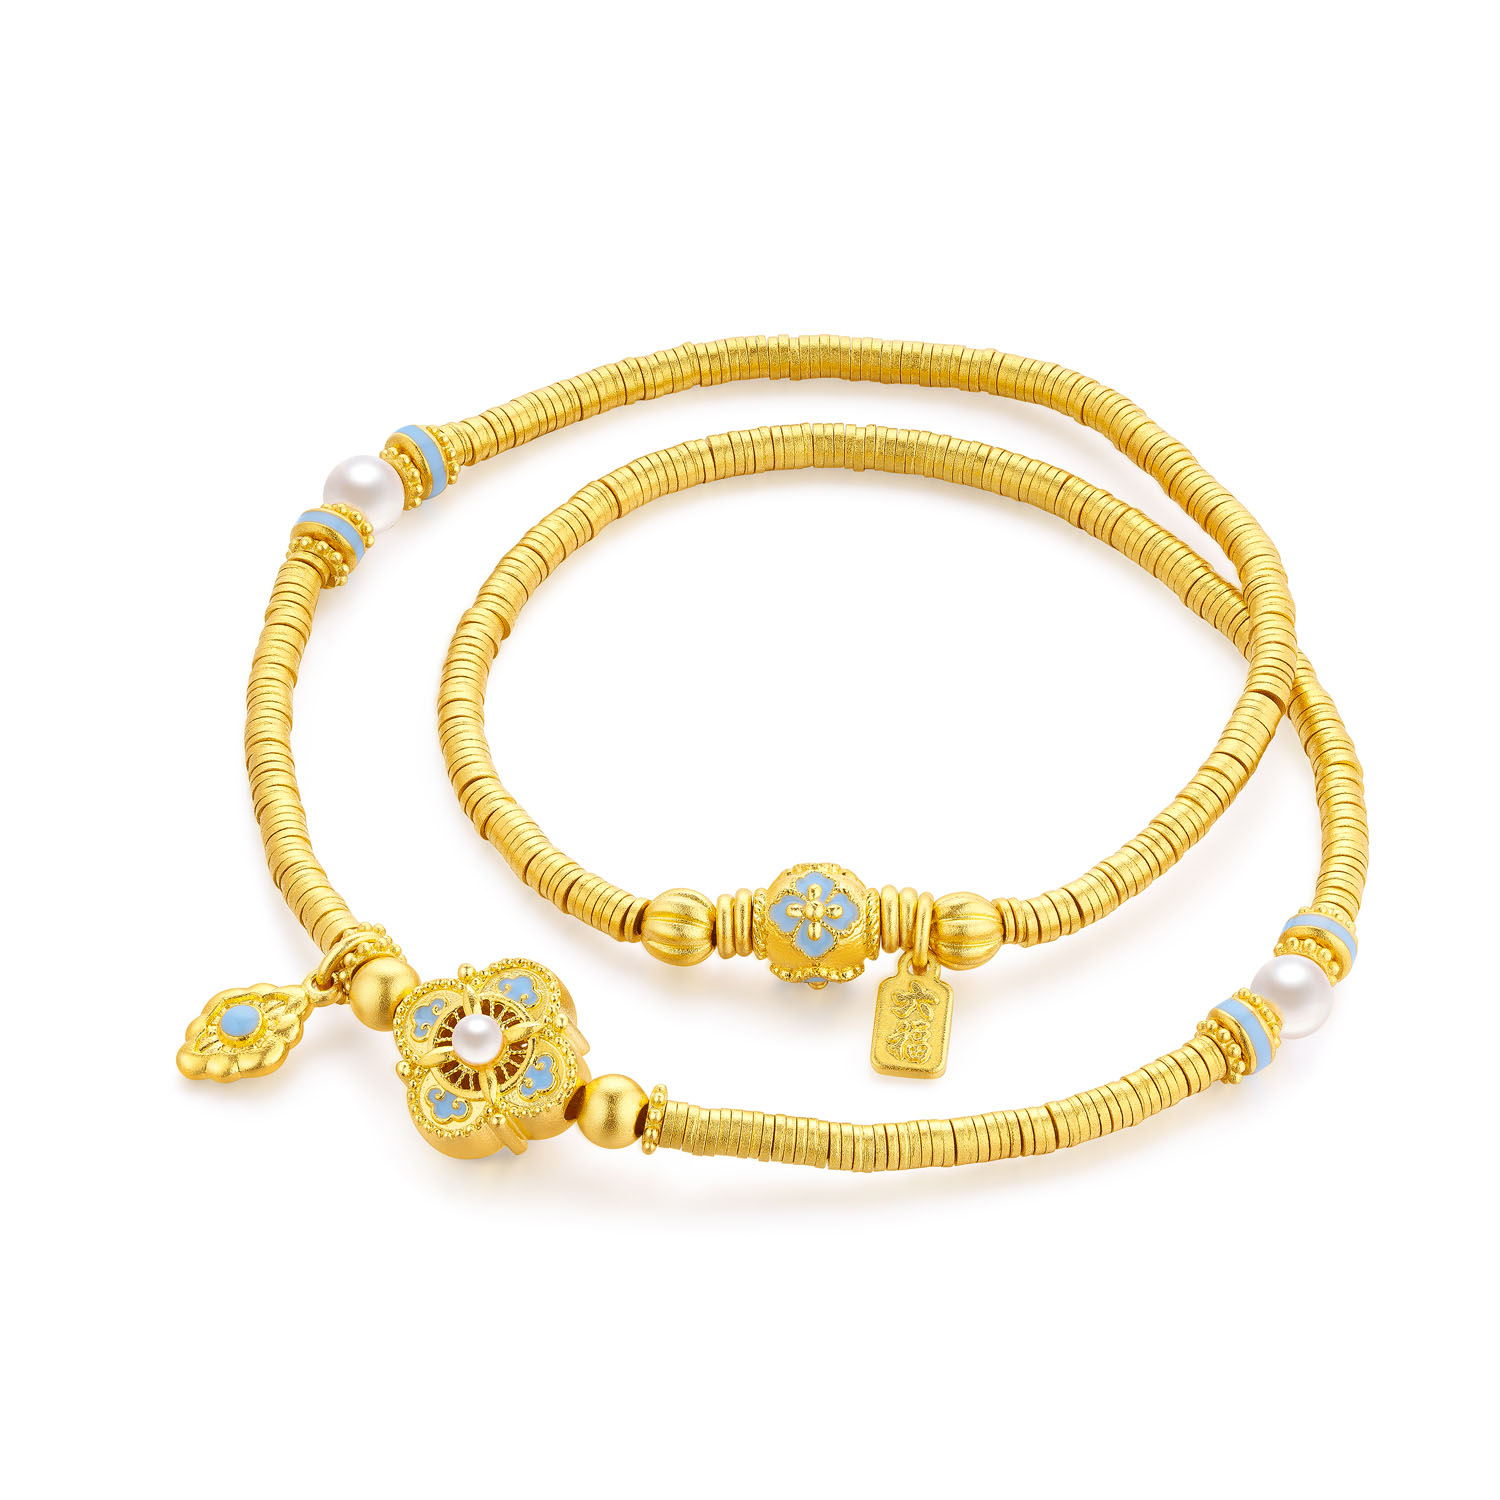 Heirloom Fortune - Charm of Song Dynasty Collection "Auspicious Song Style" Gold Pearl Bracelet